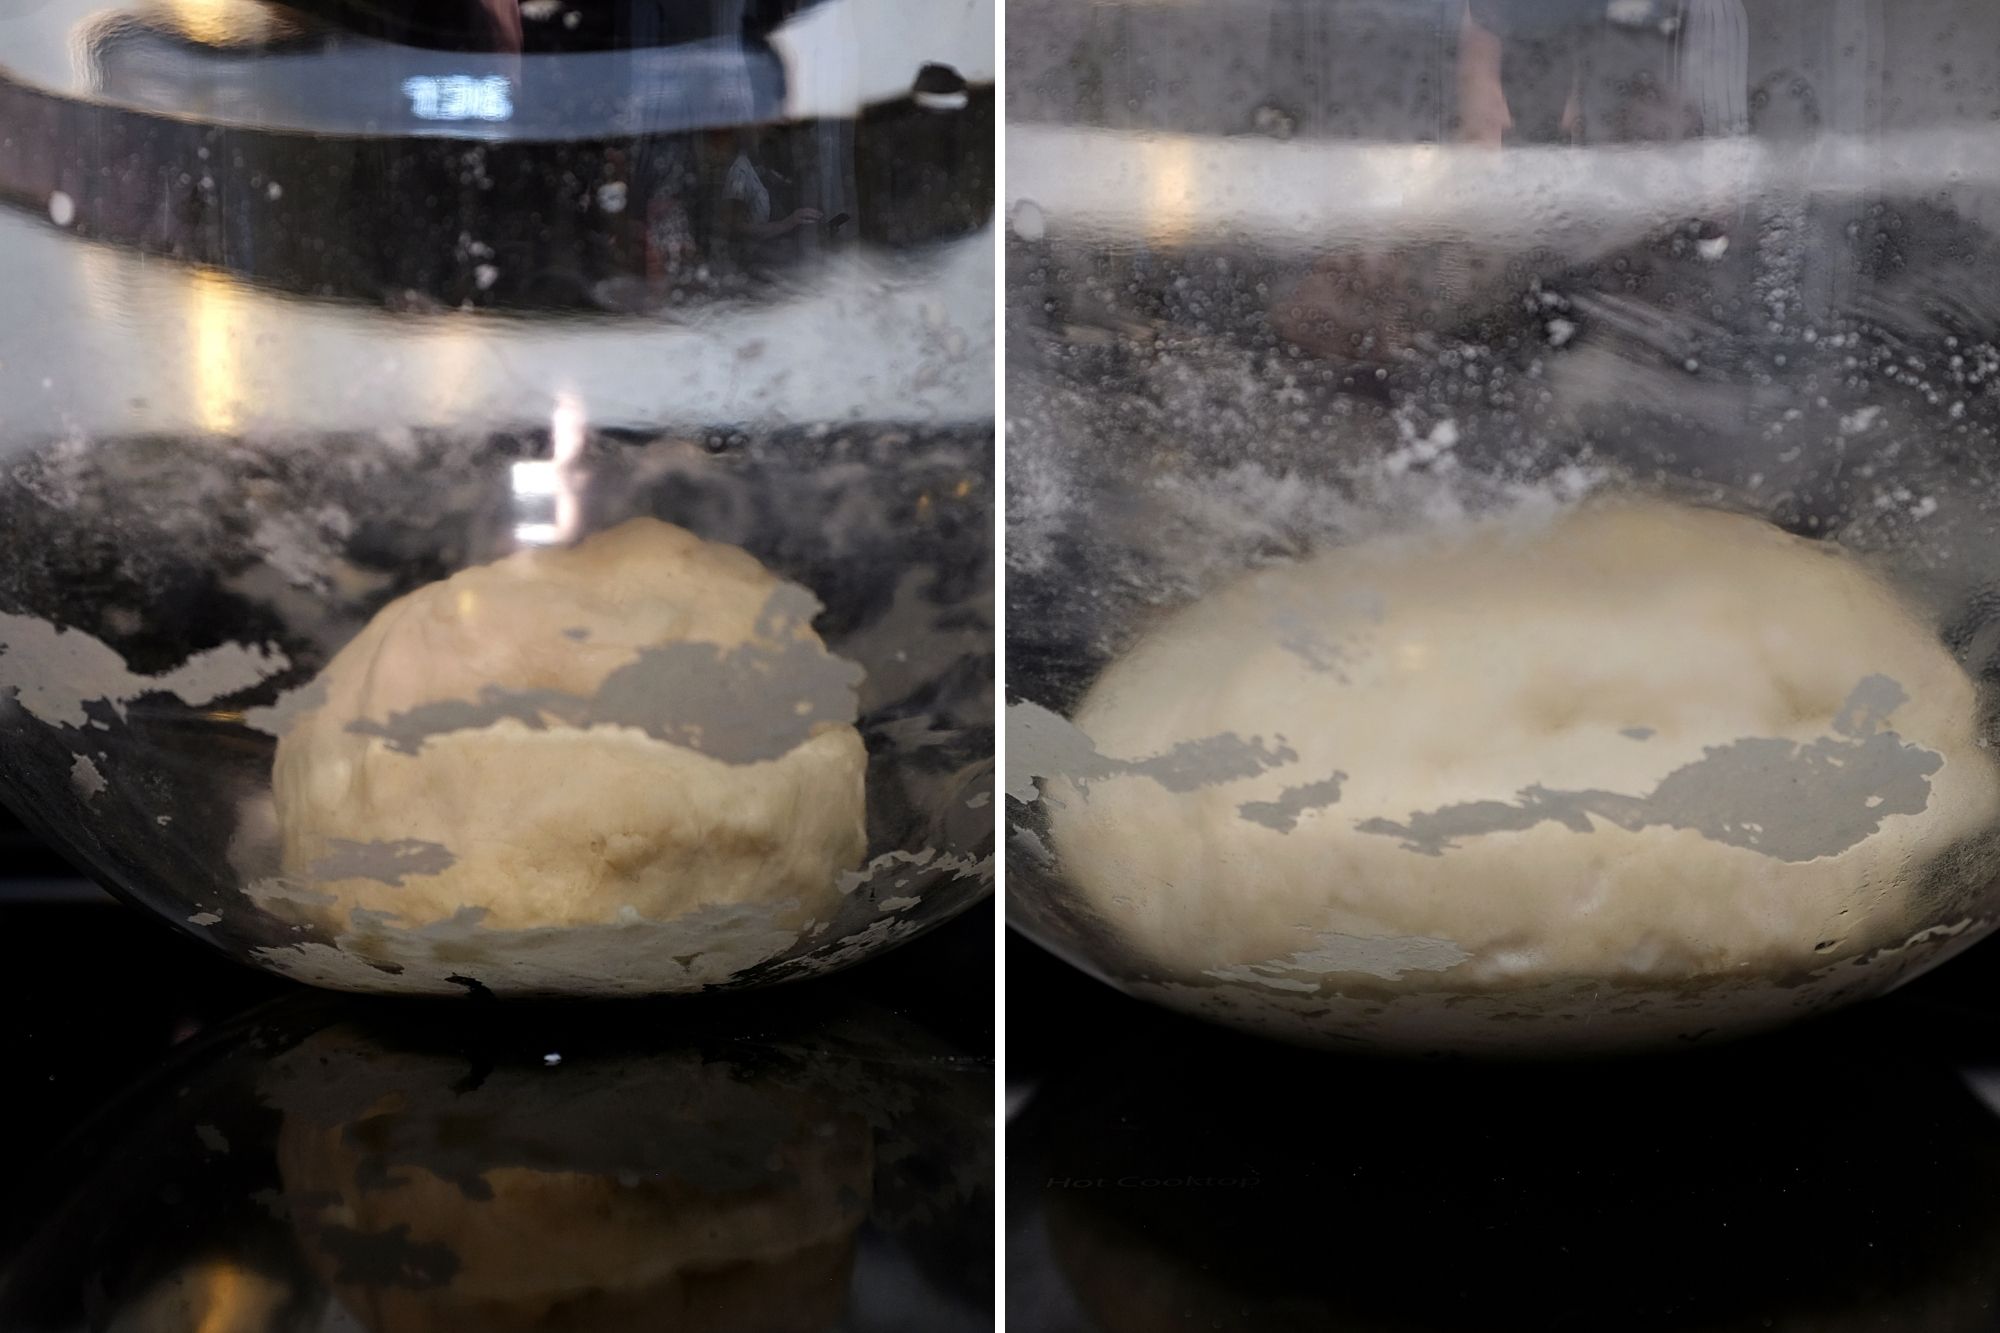 The pizza dough in a bowl before and after rising; it has expanded significantly